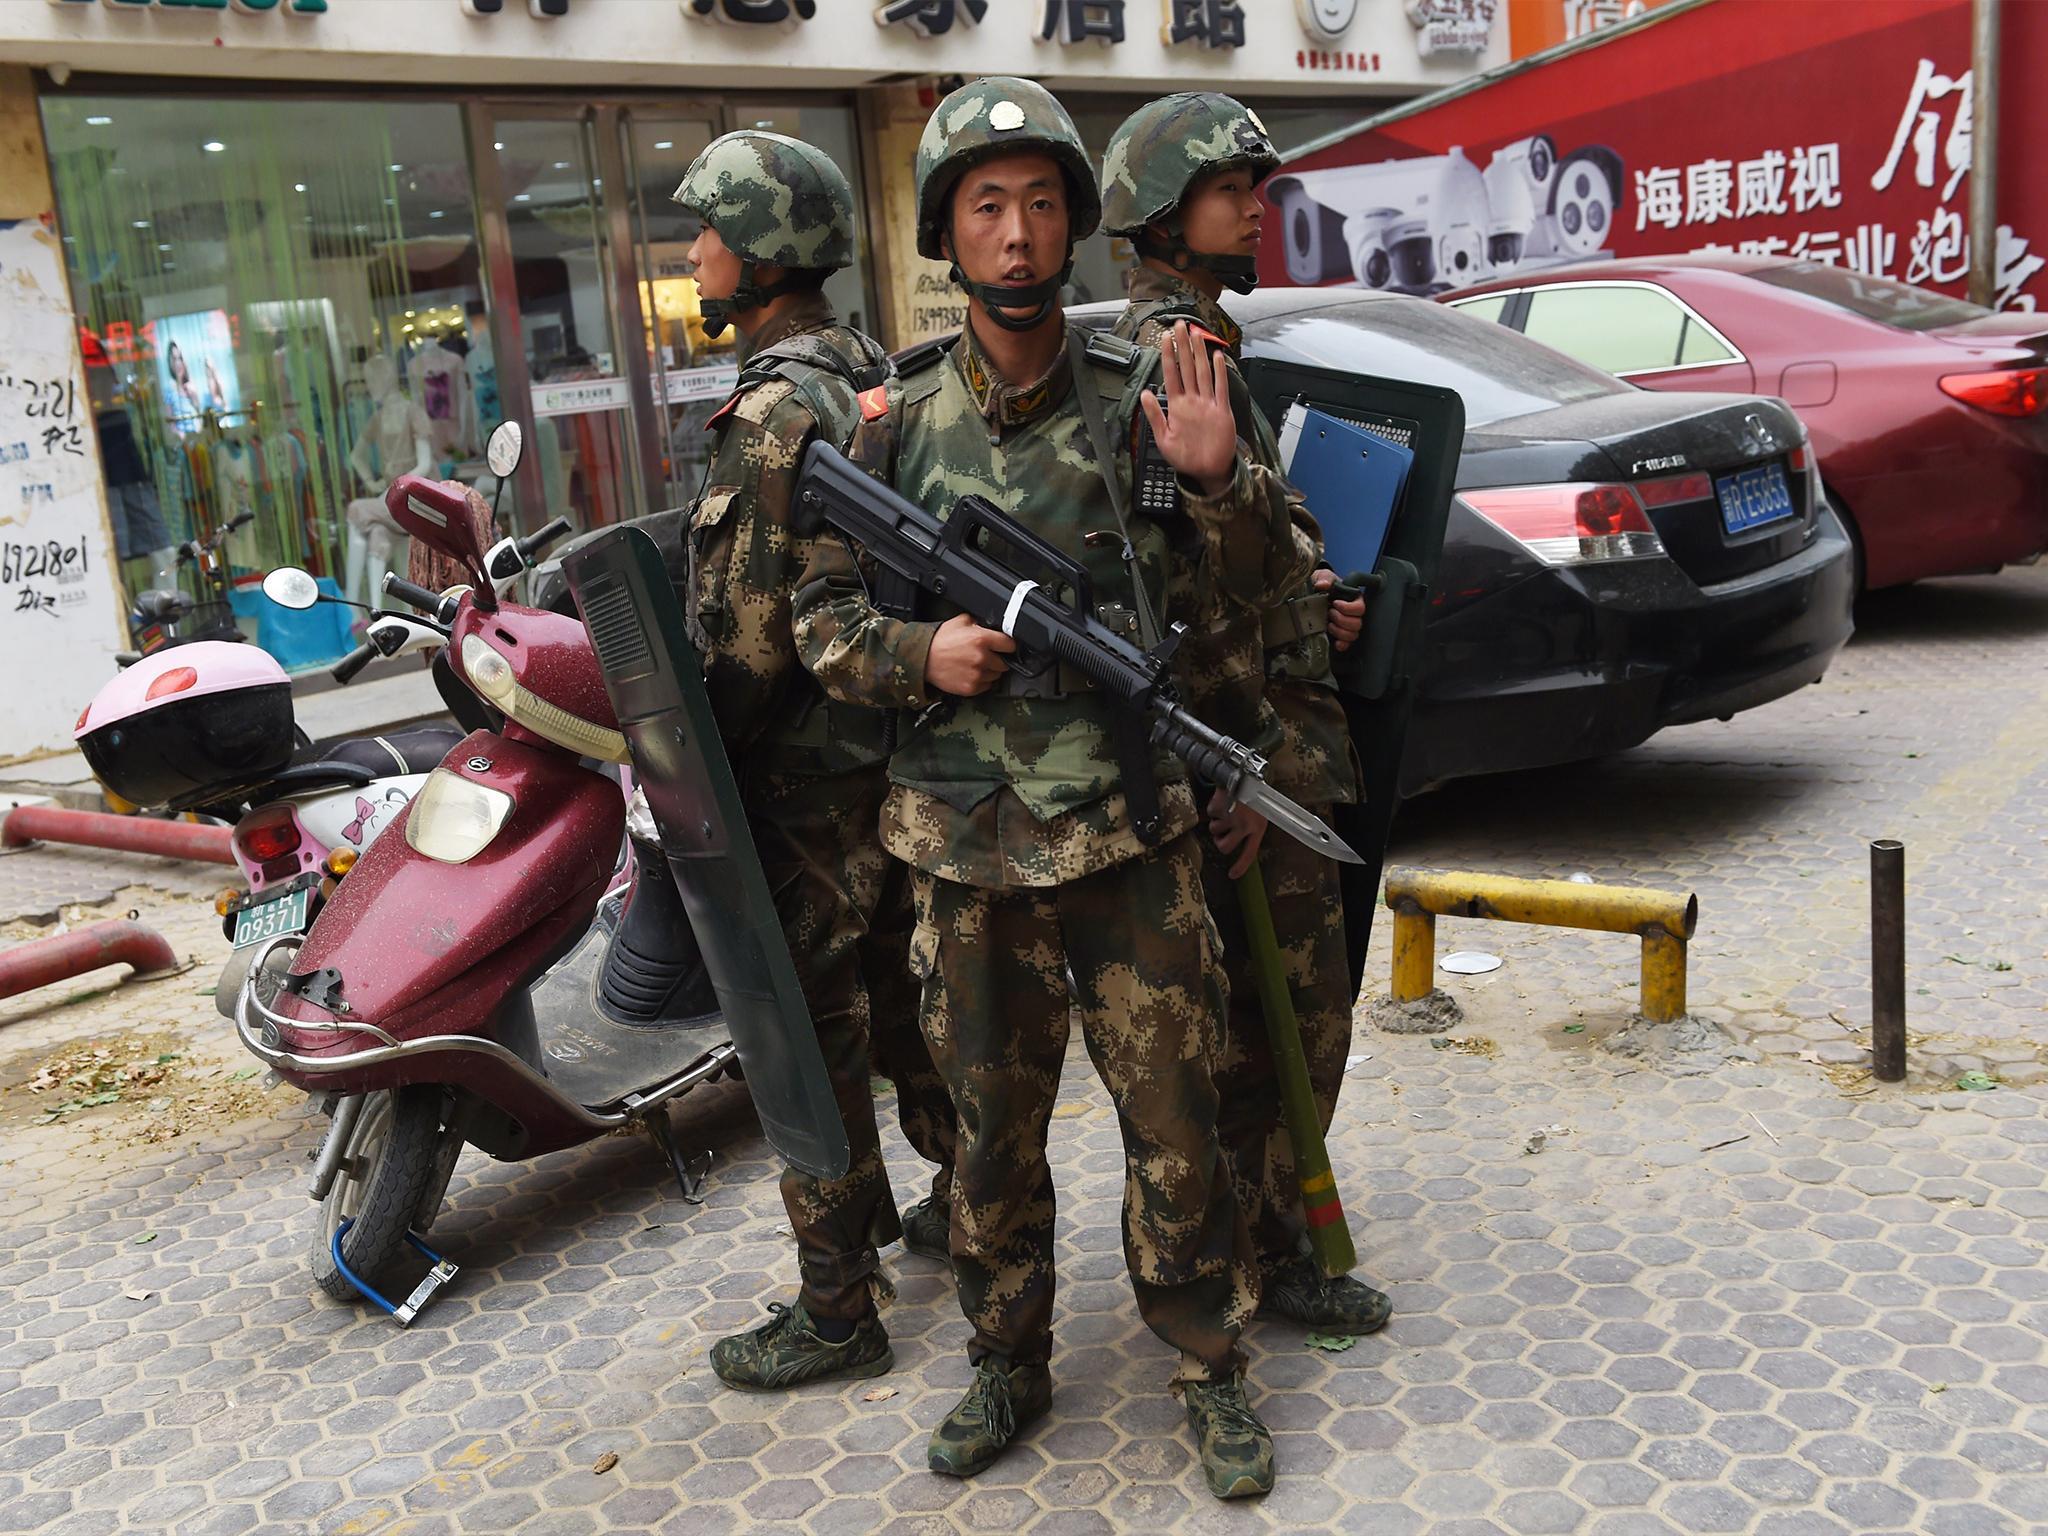 Unprecedents levels of police are patrolling Xinjiang's streets